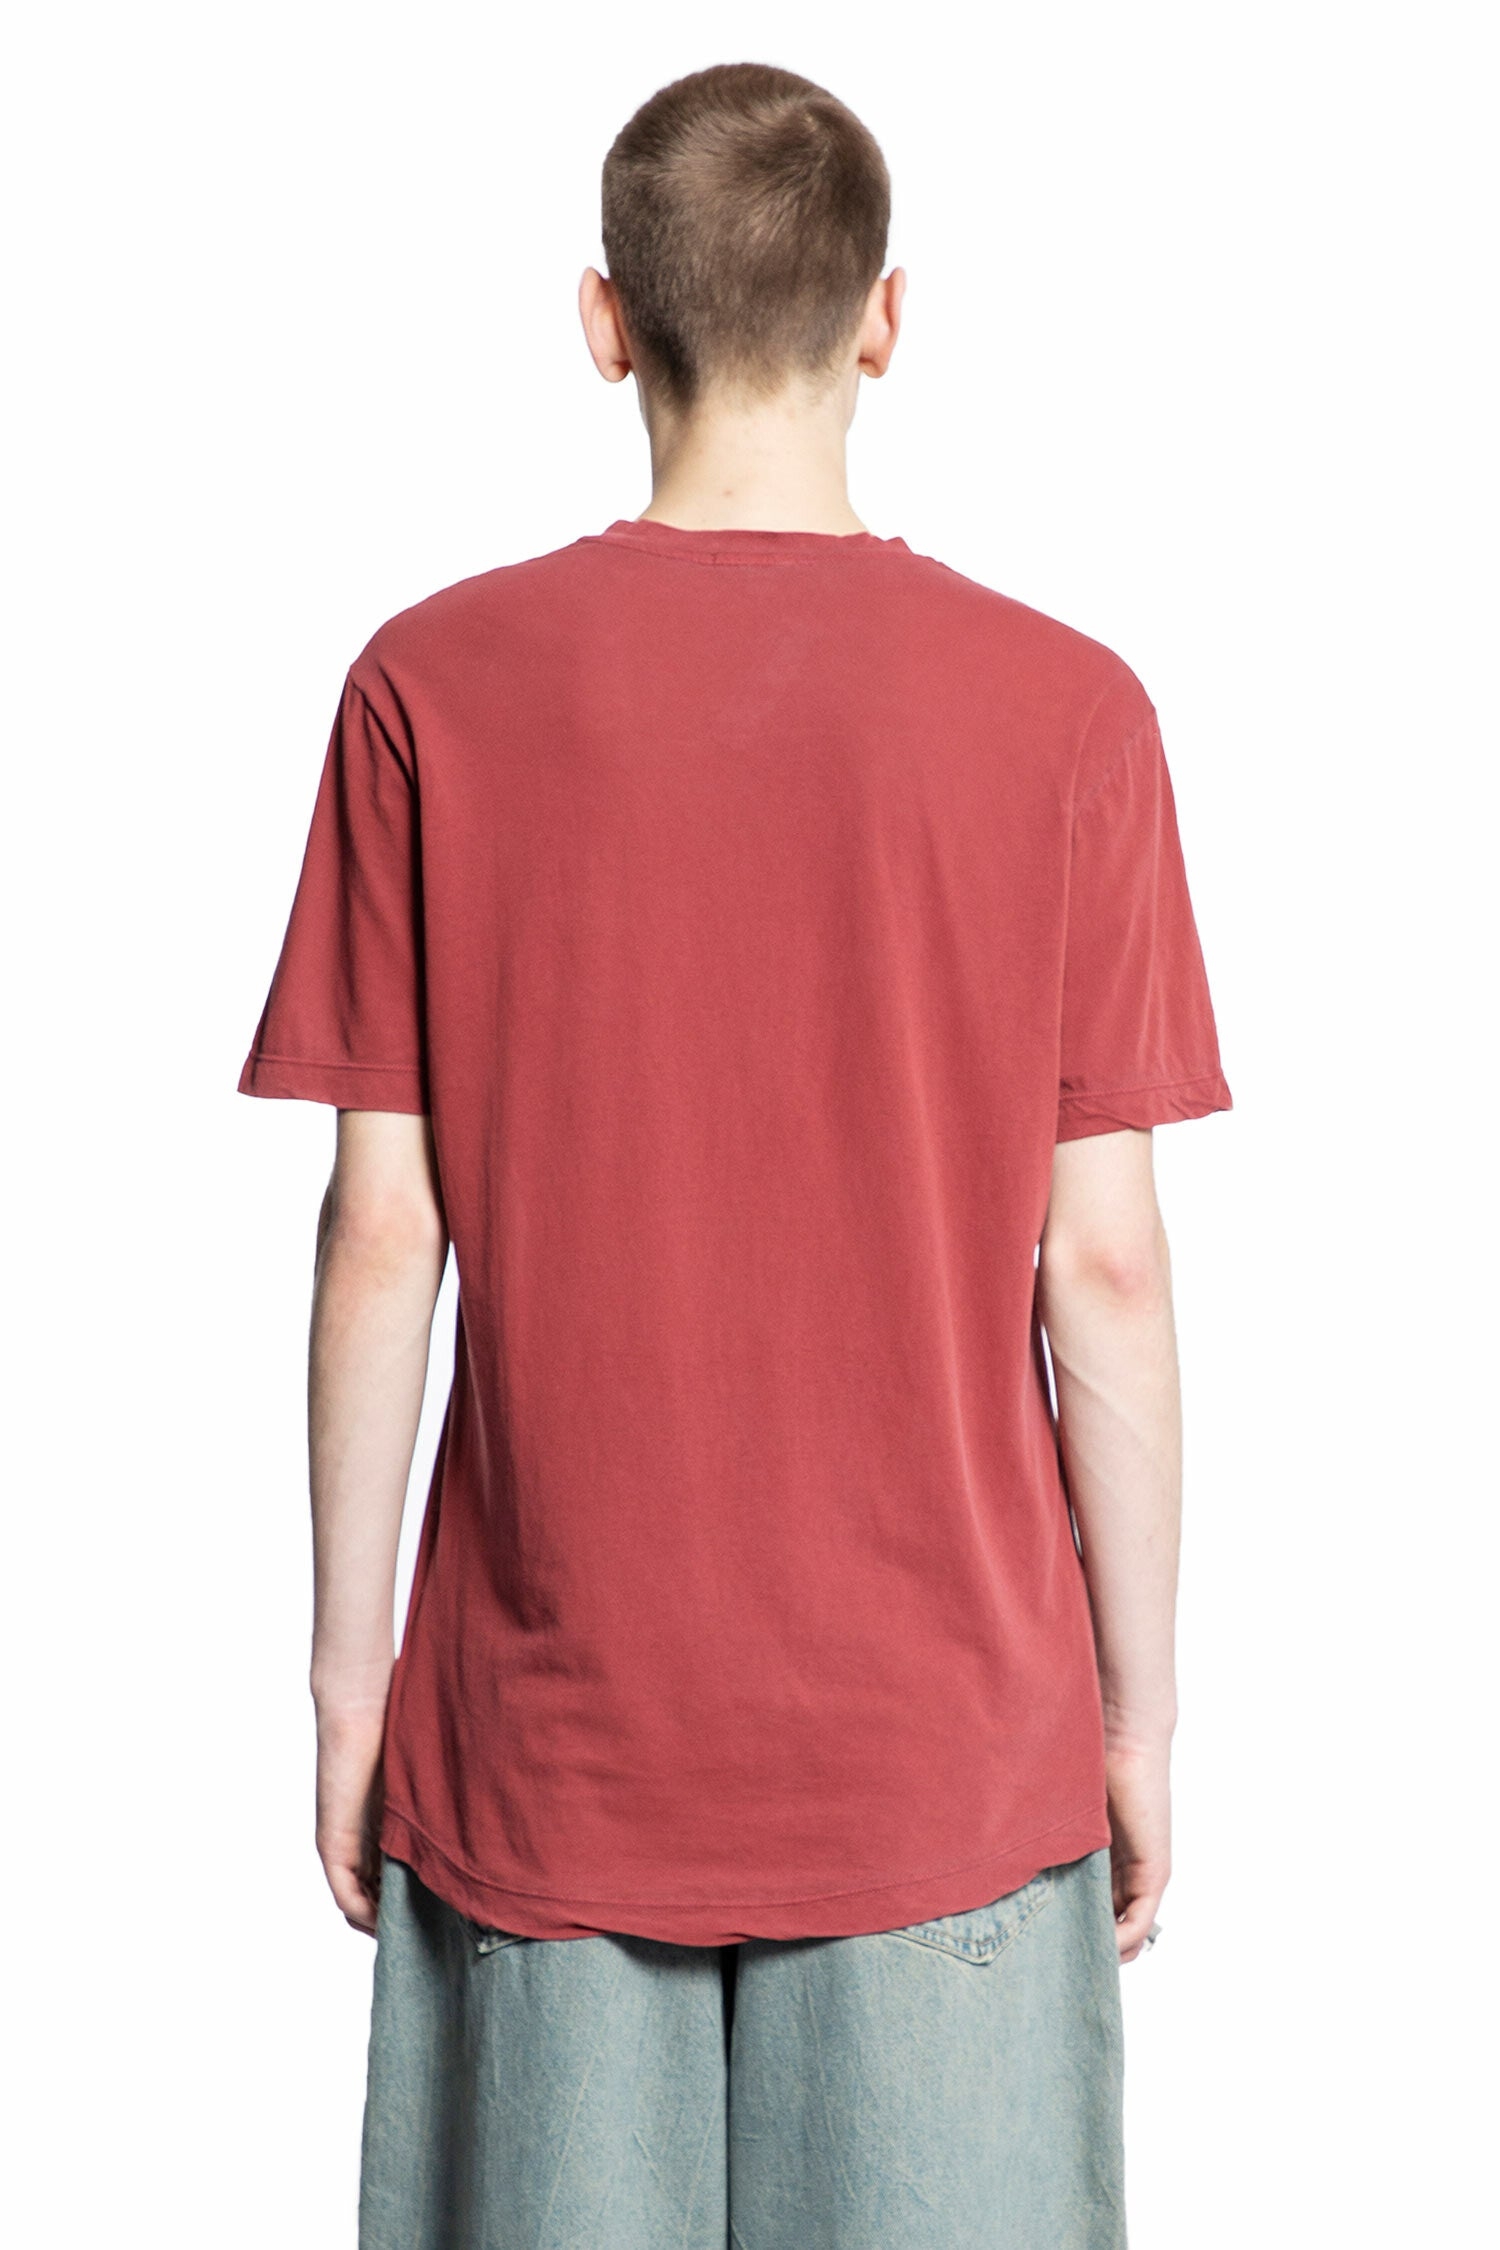 JAMES PERSE MAN RED T-SHIRTS